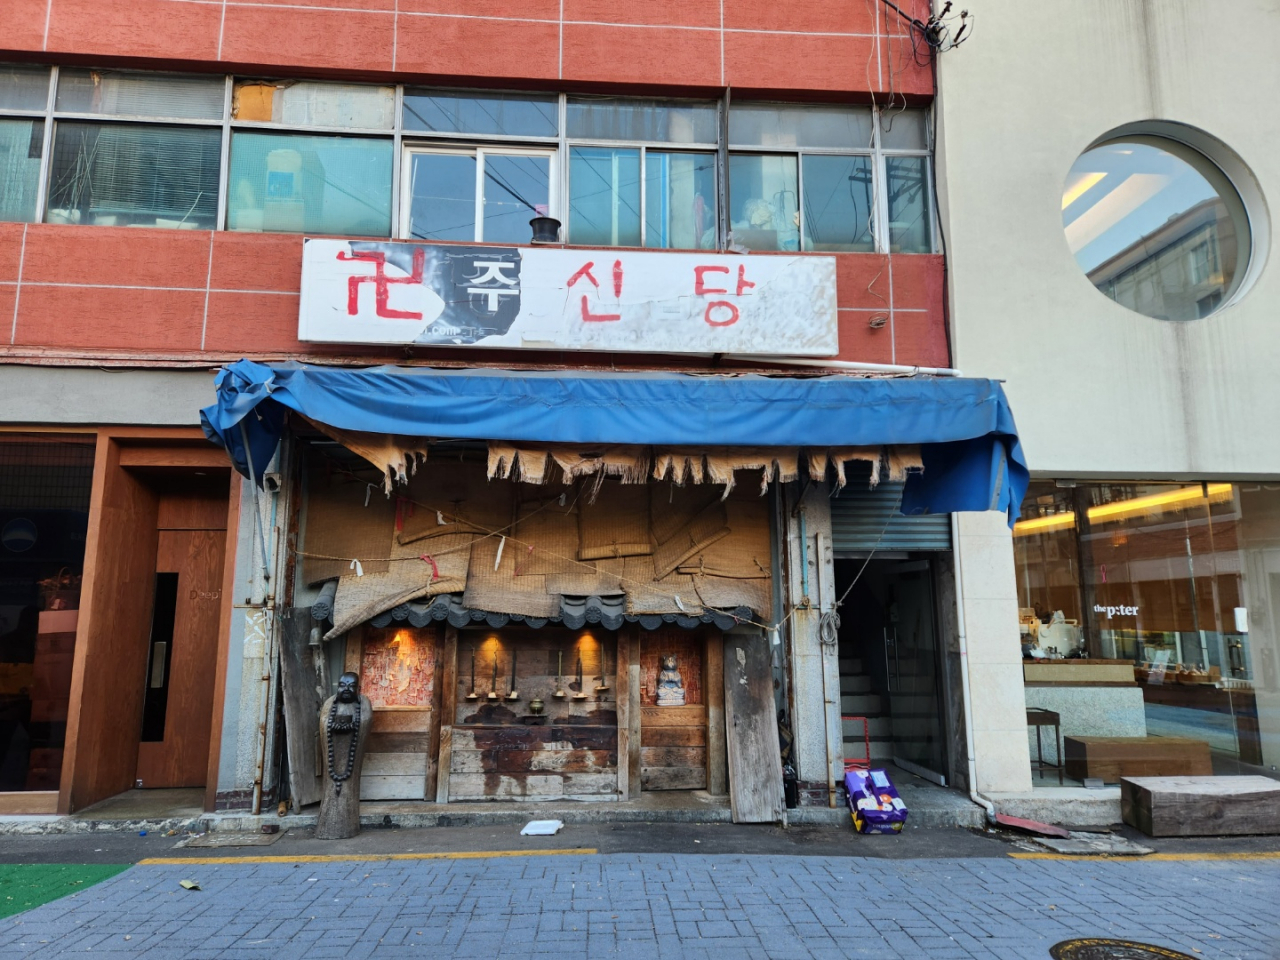 Cocktail bar Zoo Sindang is themed after the 12 zodiac signs. (Choi Jae-hee / The Korea Herald)